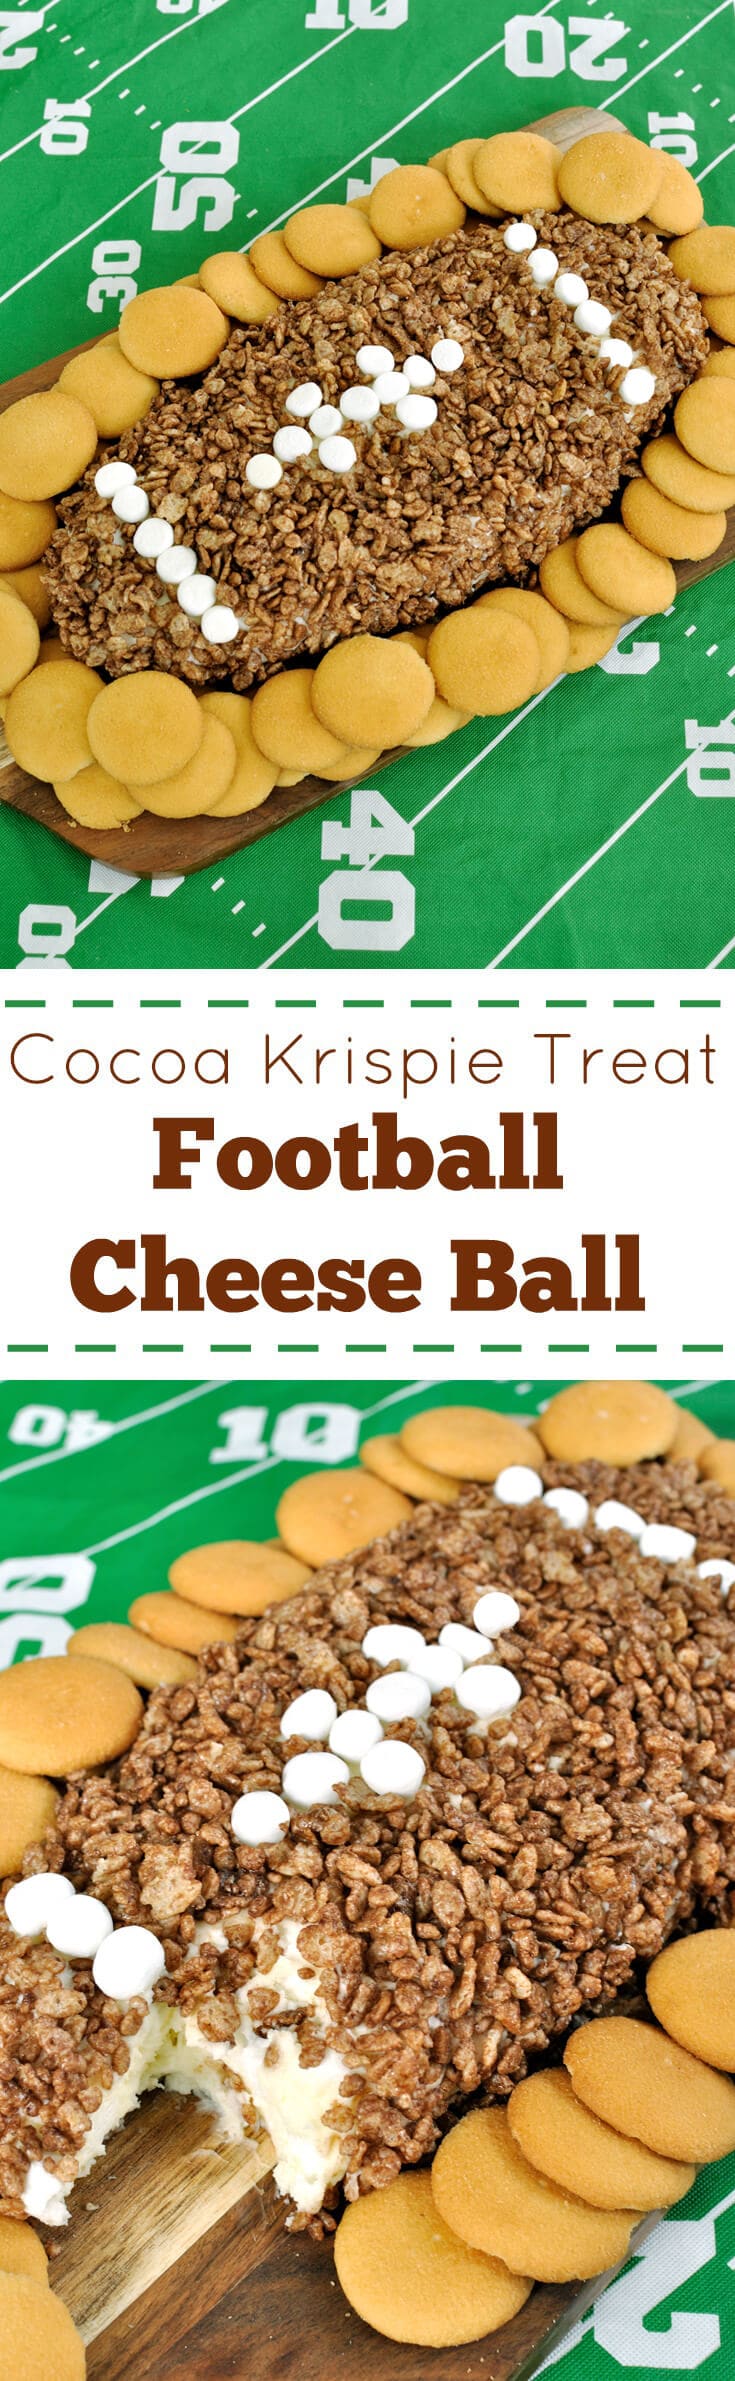 cocoa-krispie-cheese-ball-collage